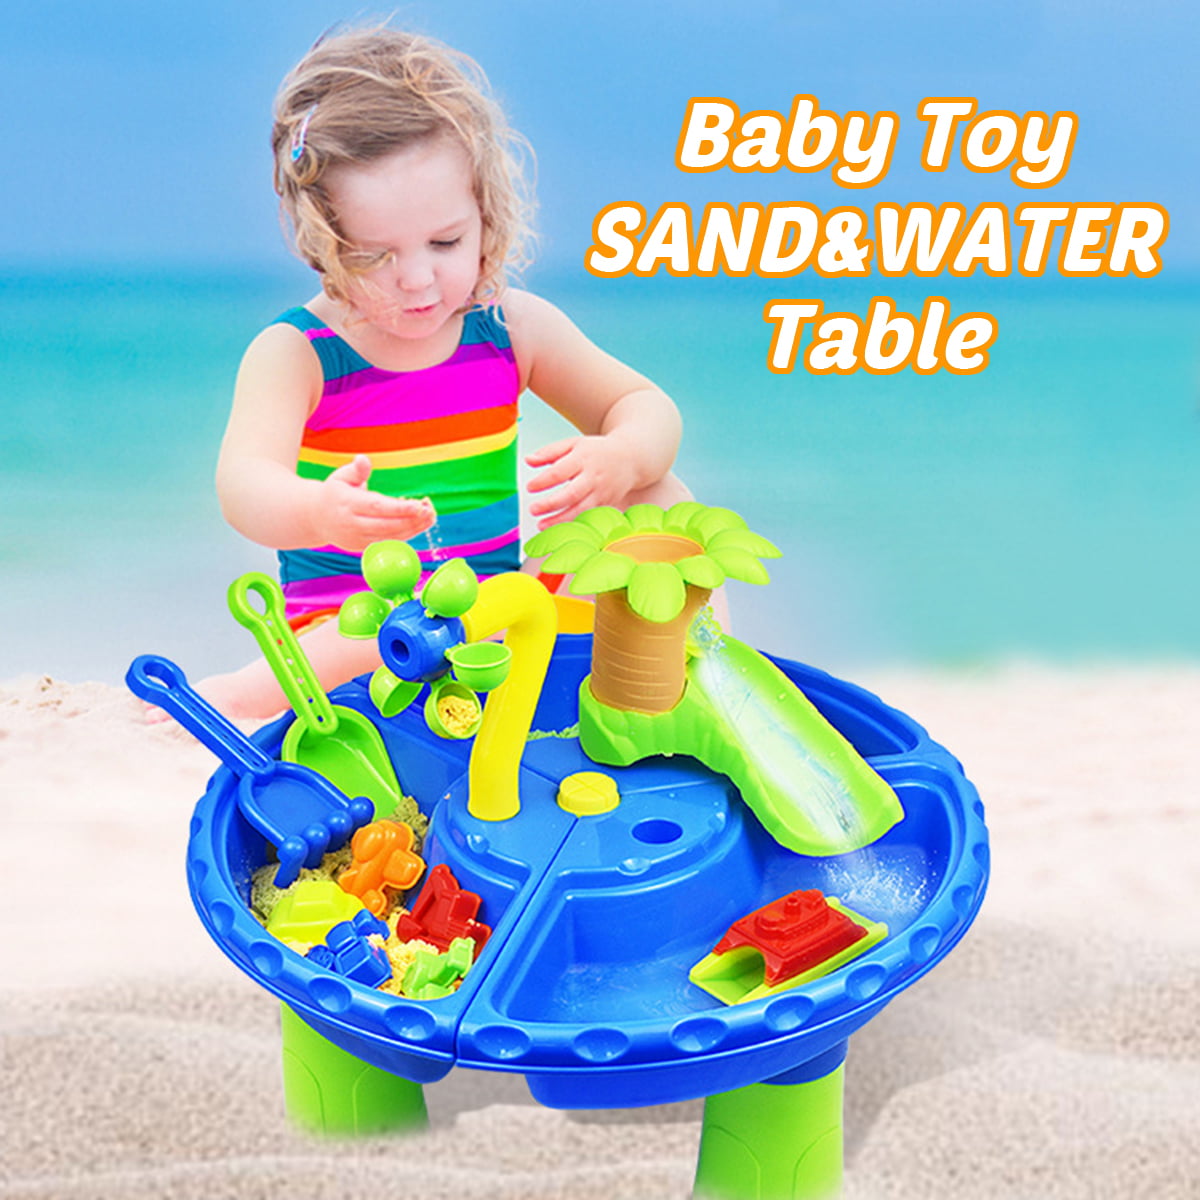 Kids Outdoor/Indoor Sand and Water Table Play Set Toys Beach Sandpit Summer 